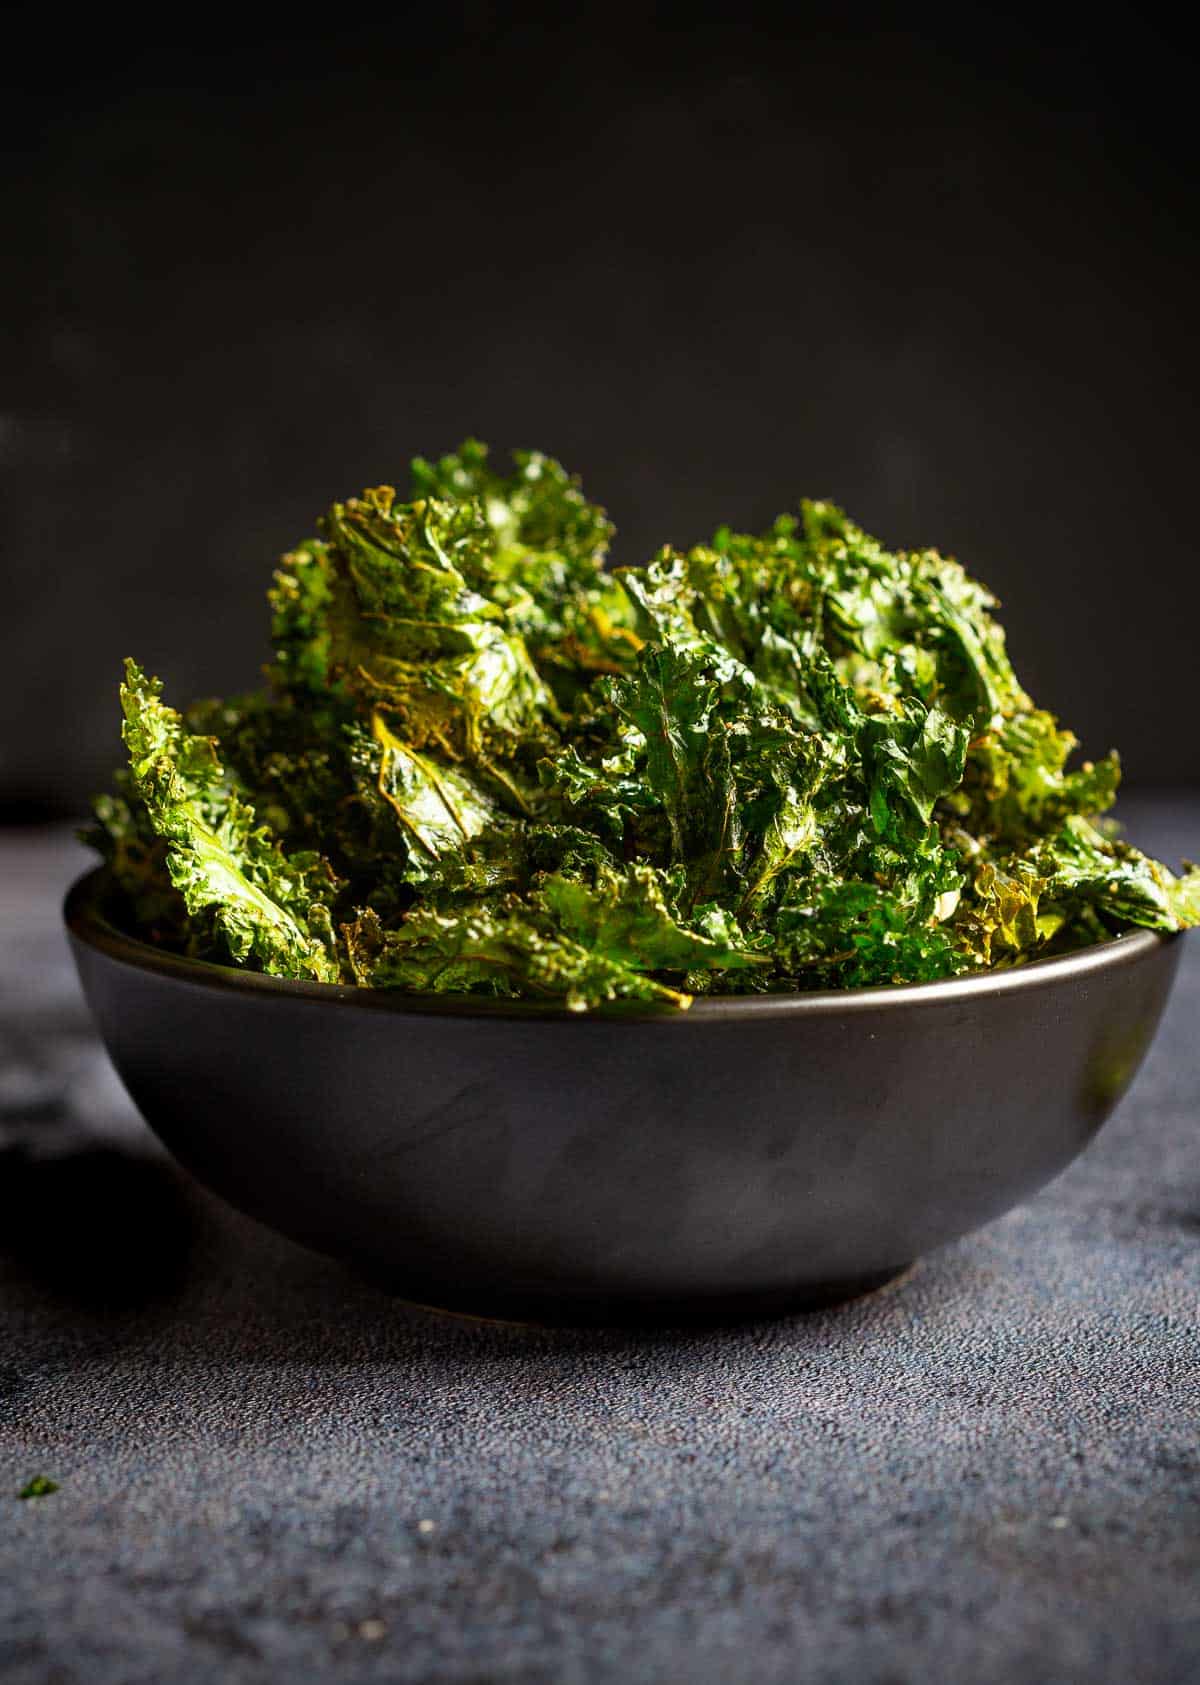 Crispy Smoked Kale Chips in a bowl